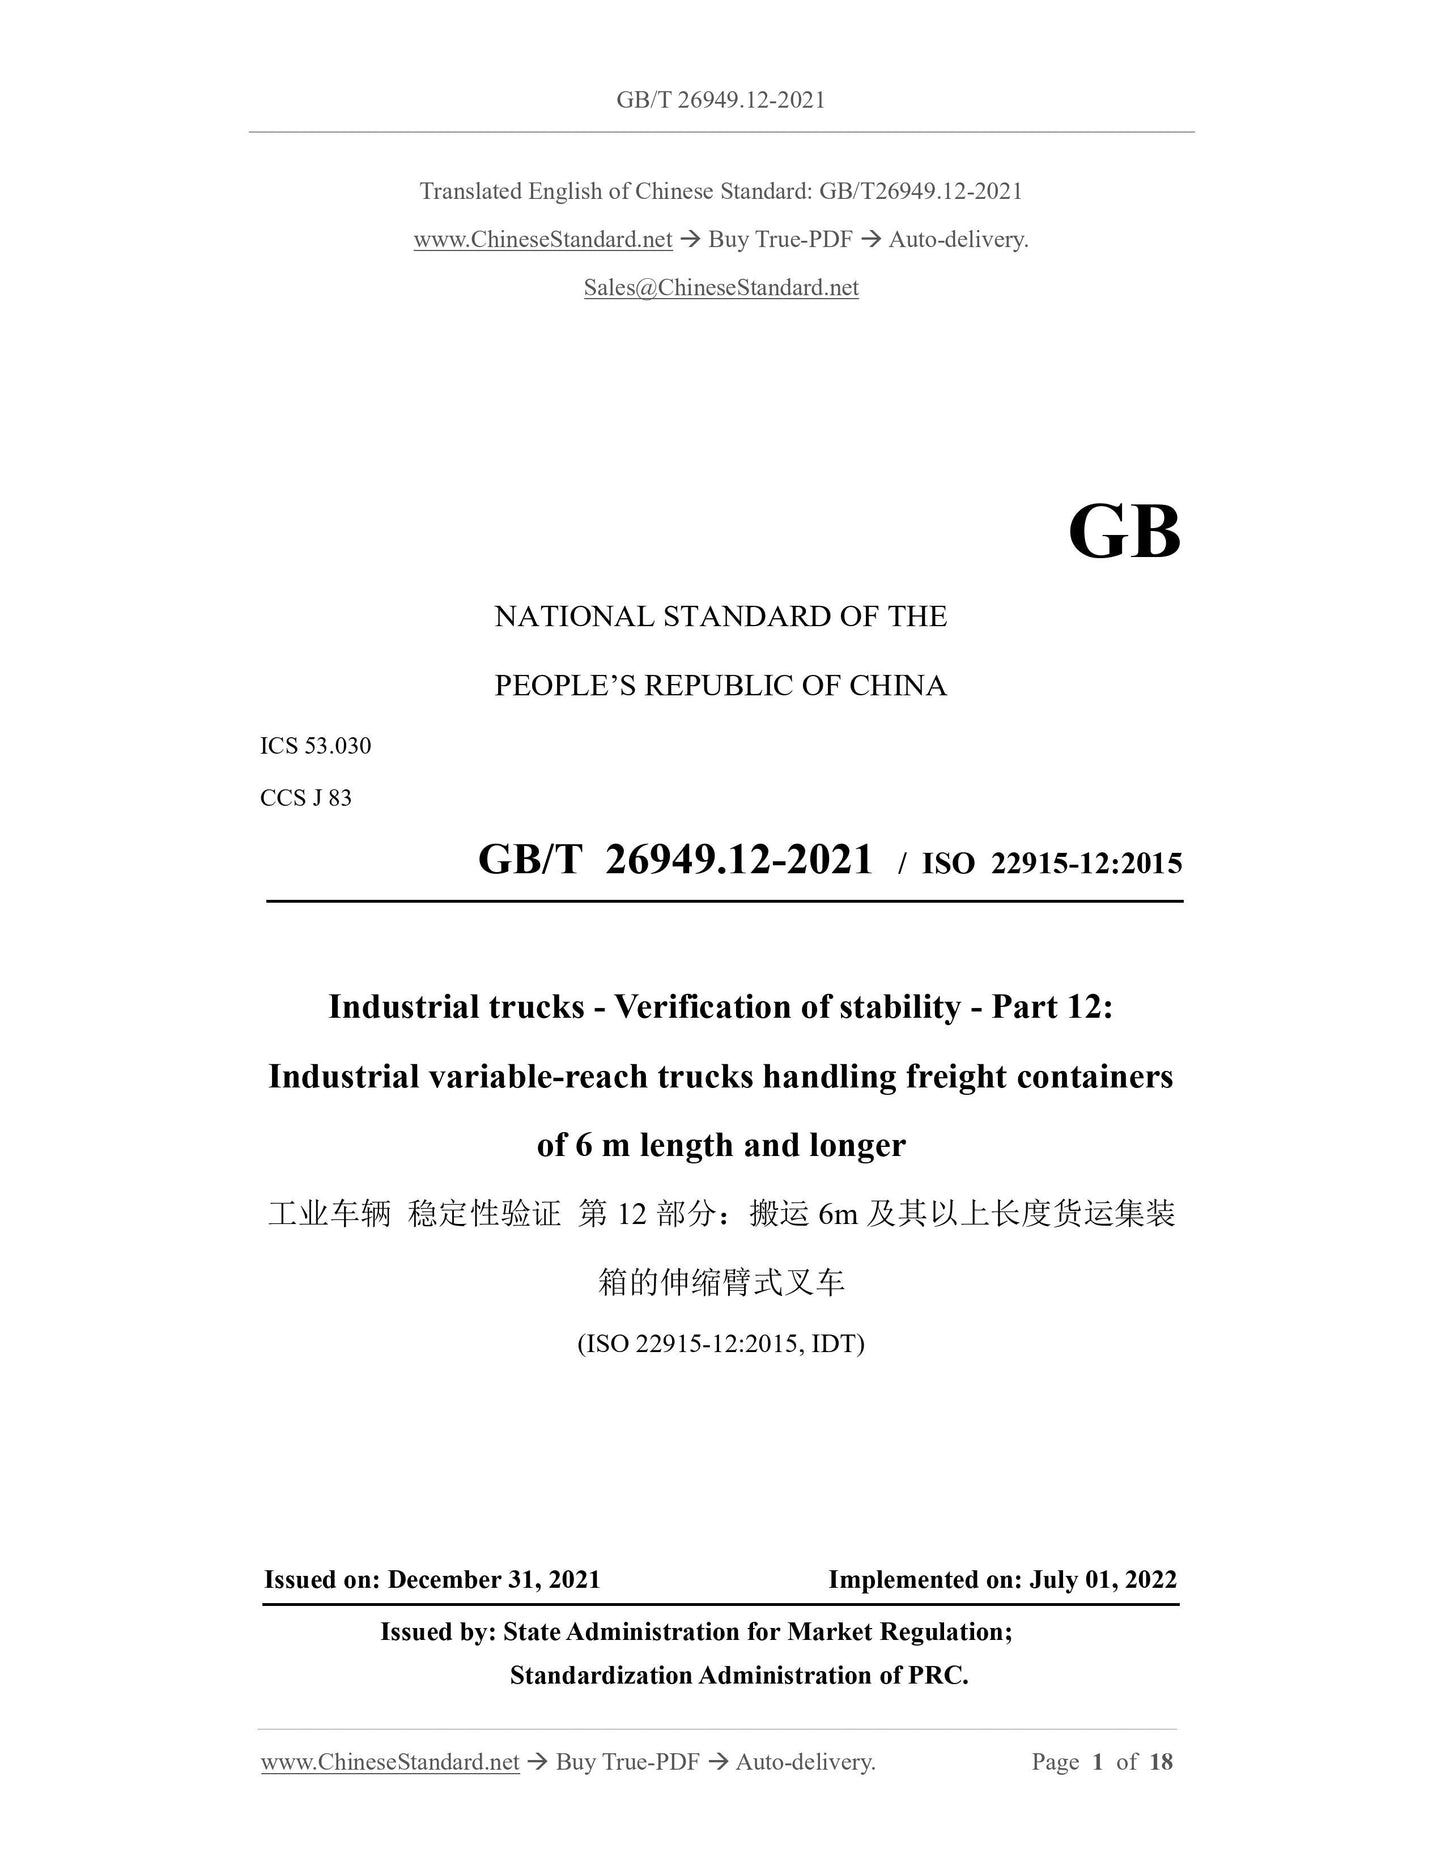 GB/T 26949.12-2021 Page 1